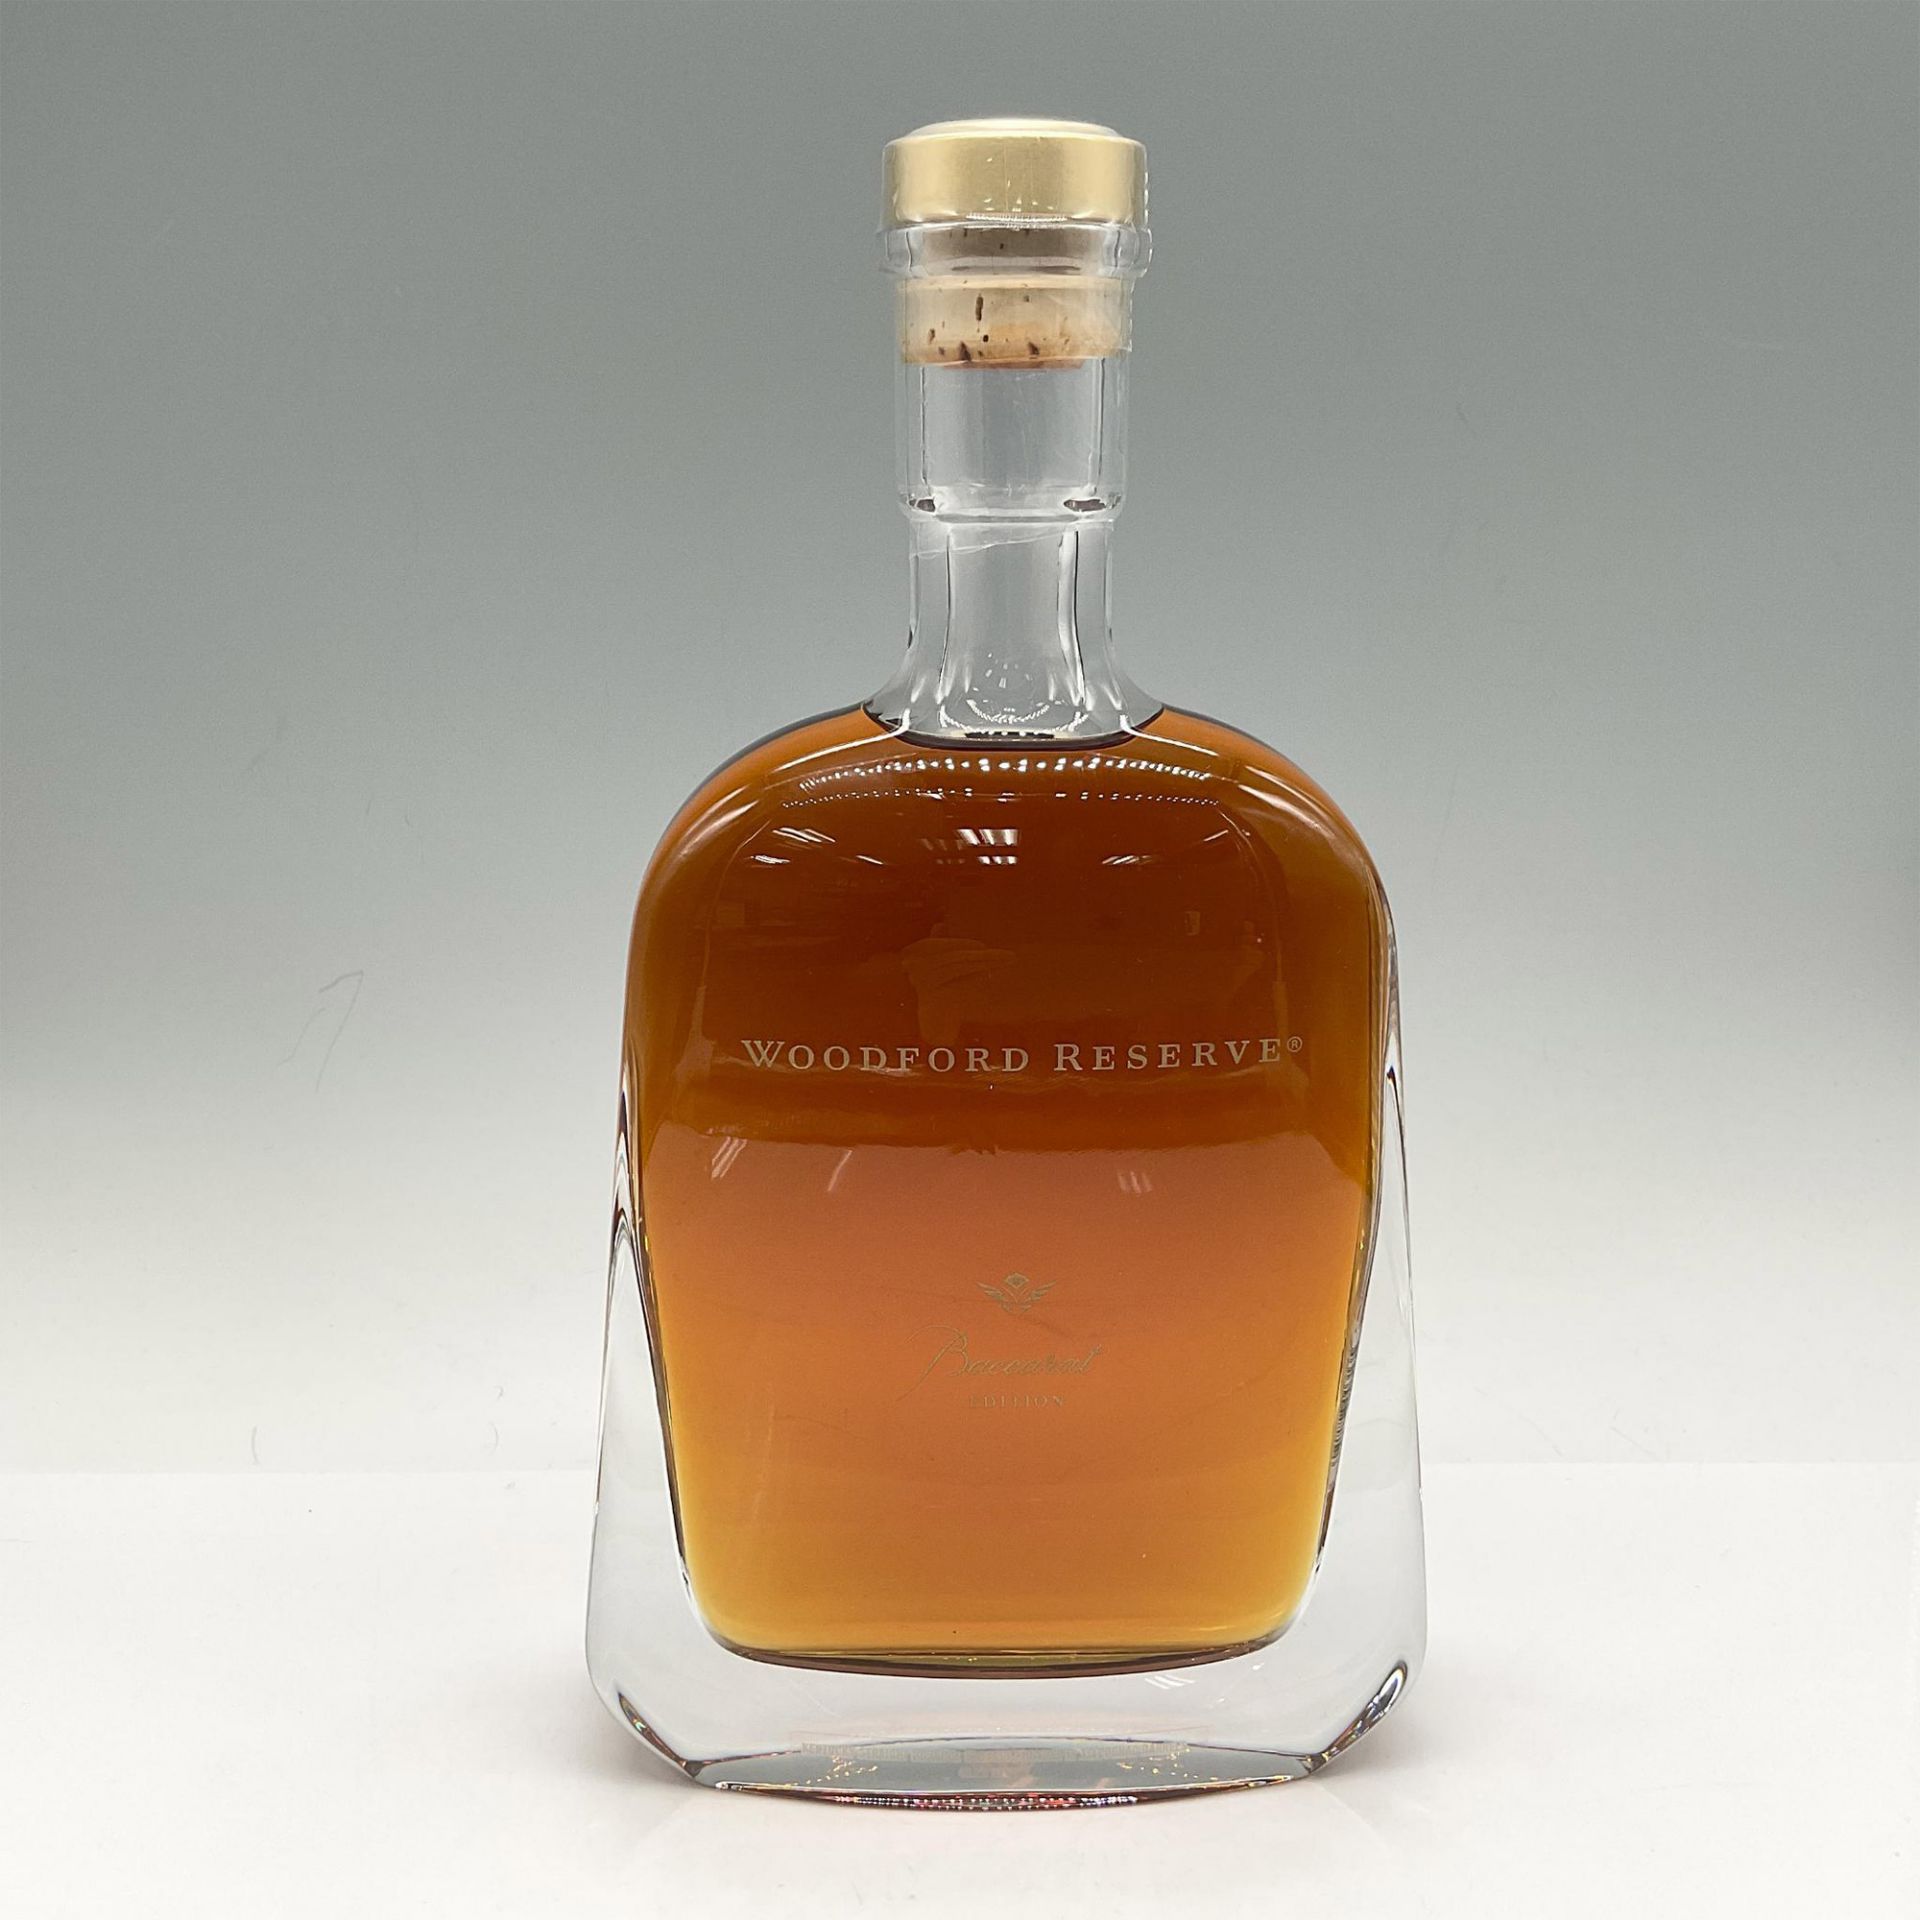 Woodford Reserve Baccarat Edition Kentucky Bourbon Whiskey - Image 2 of 5